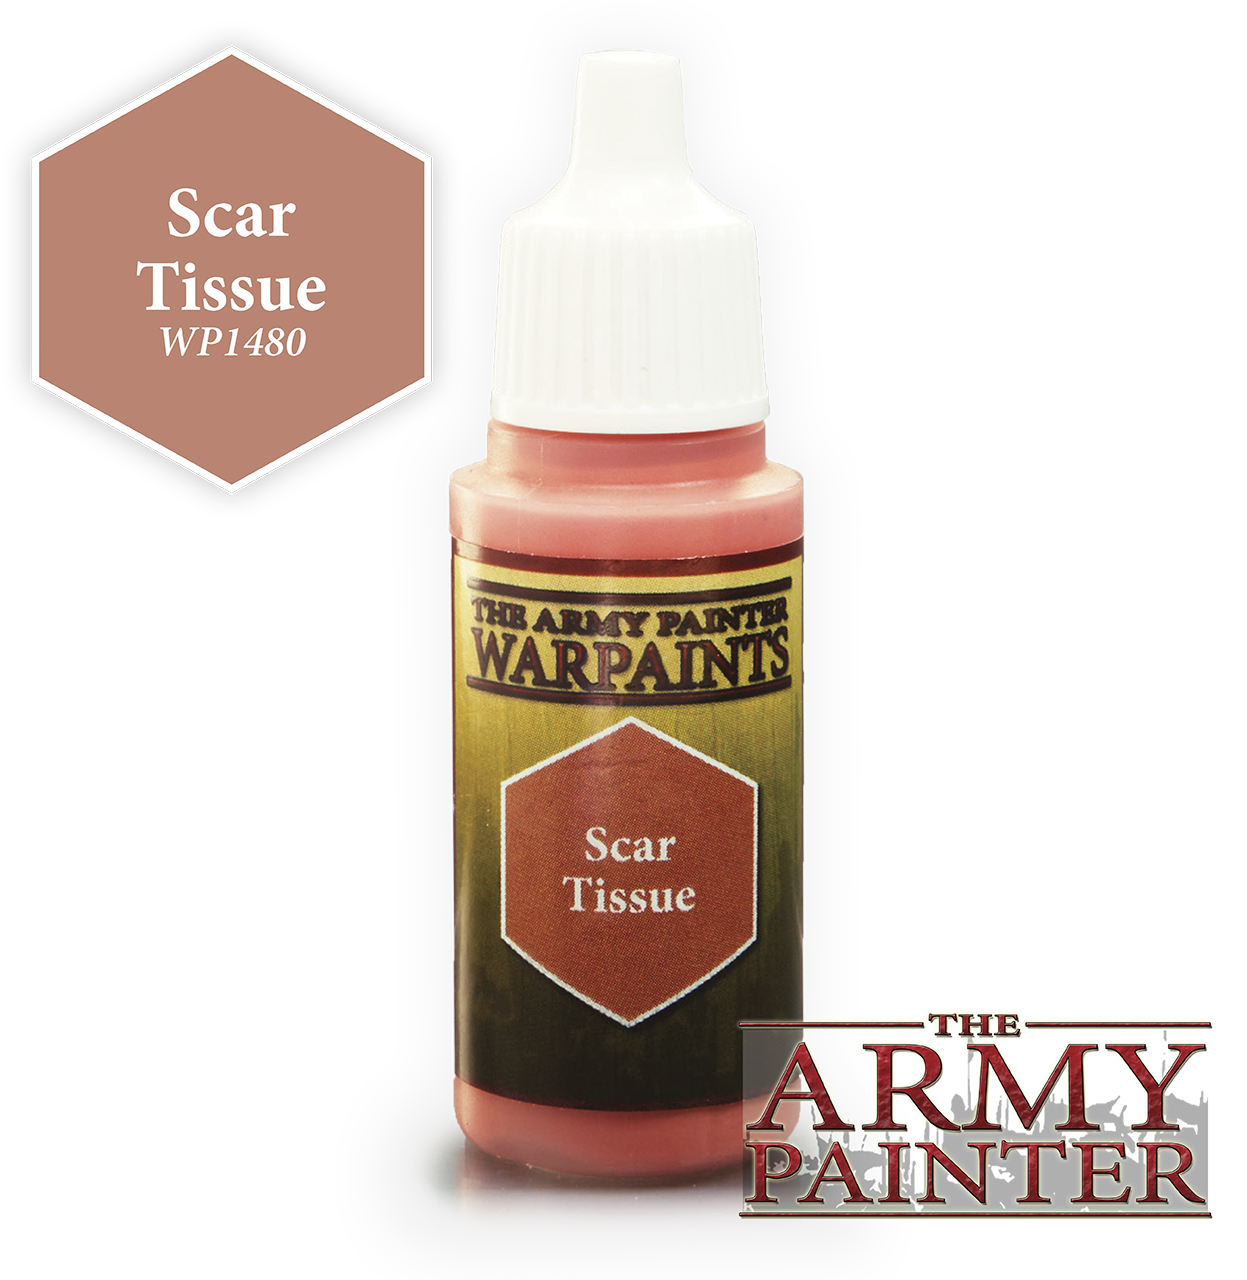 The ARMY PAINTER: Acrylics Warpaint - Scar Tissue | Tacoma Games